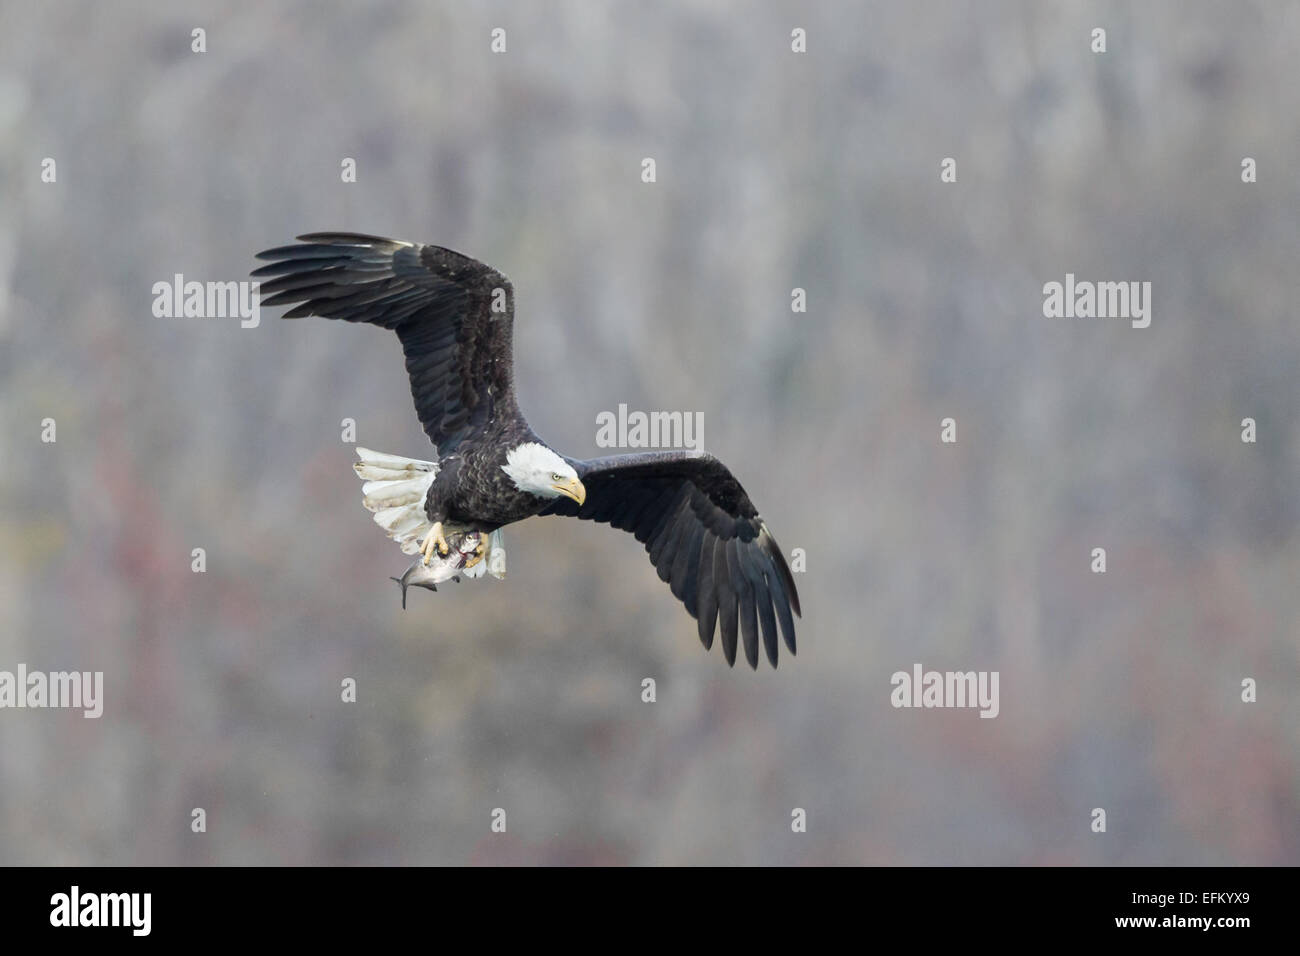 Soaring Bald Eagle with freshly caught fish Stock Photo